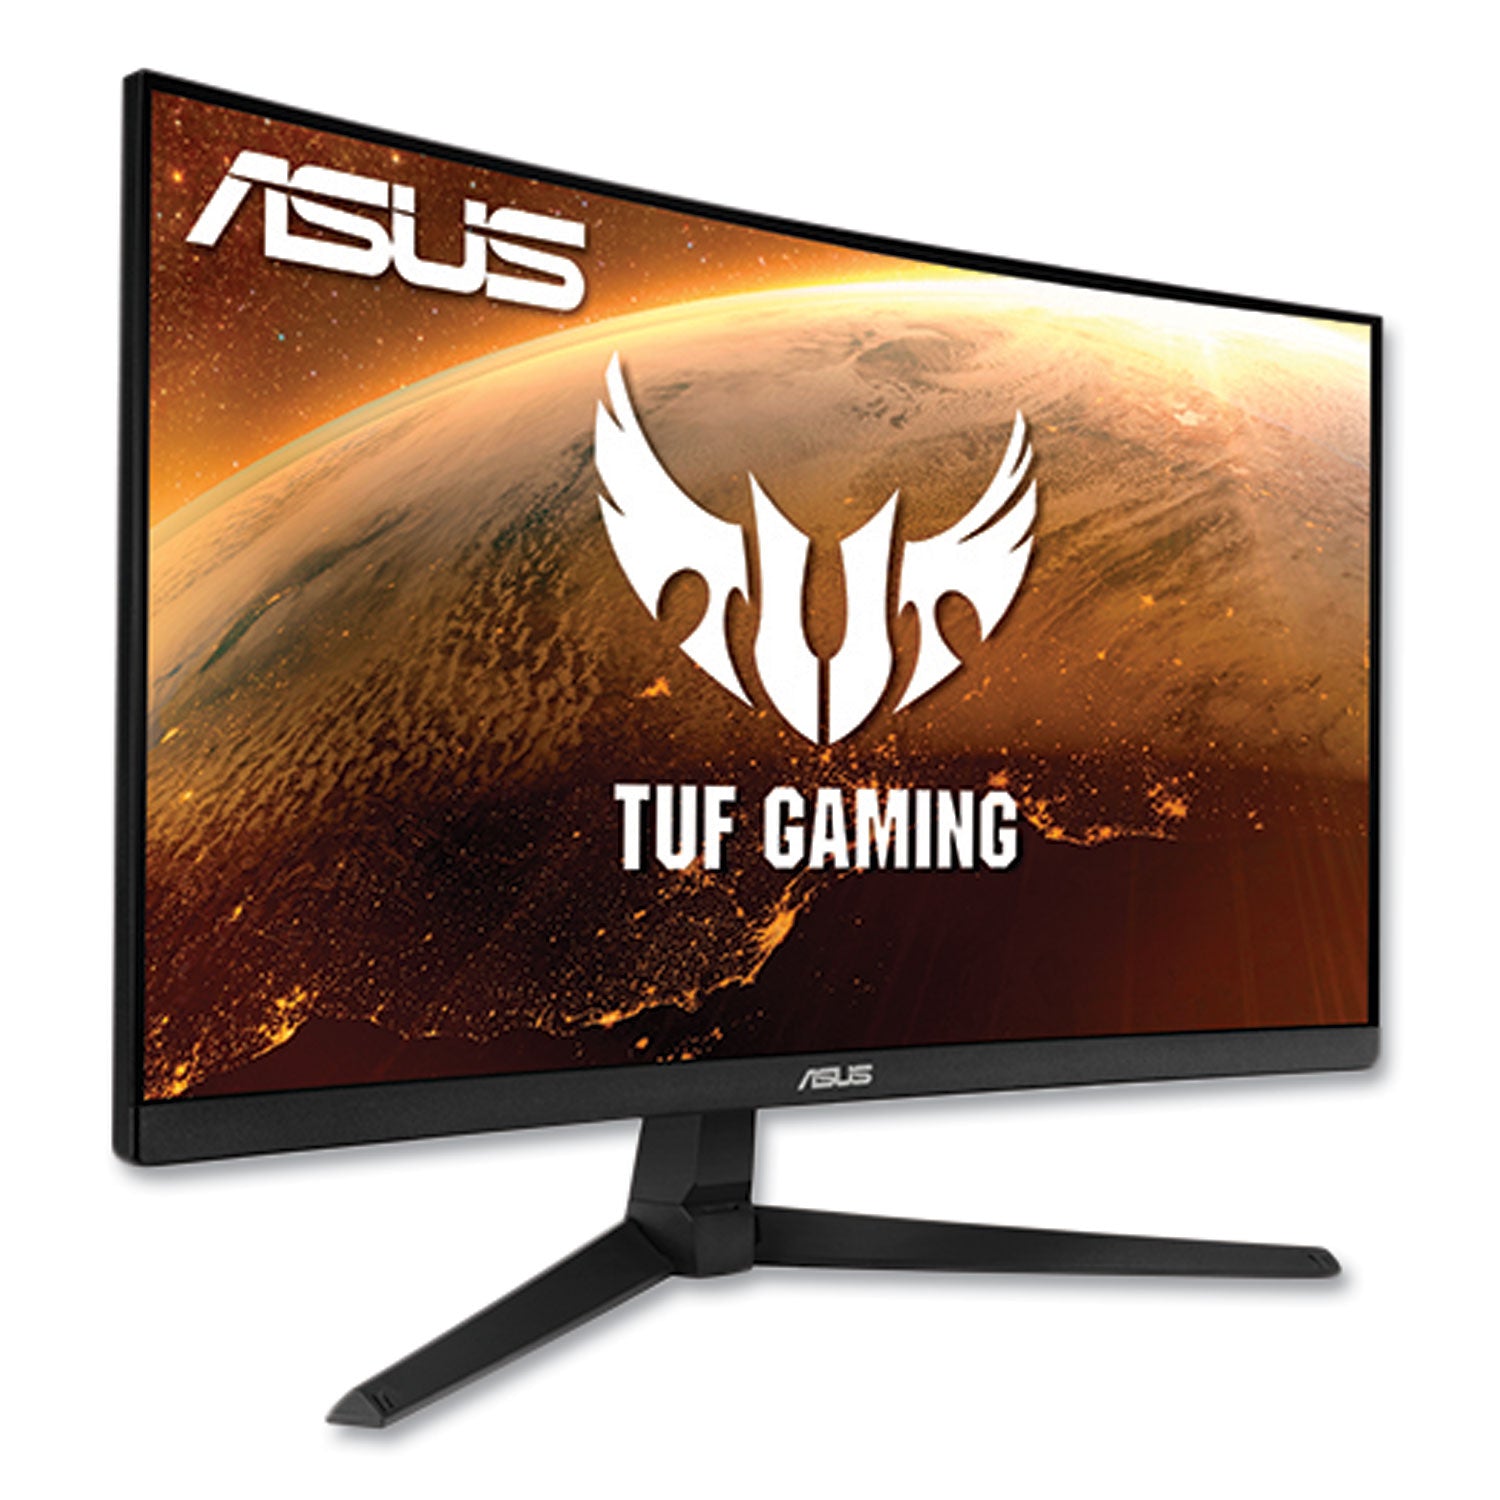 vg24vq1by-tuf-gaming-led-monitor-238-widescreen-va-panel-1920-pixels-x-1080-pixels_asuvg24vq1by - 2